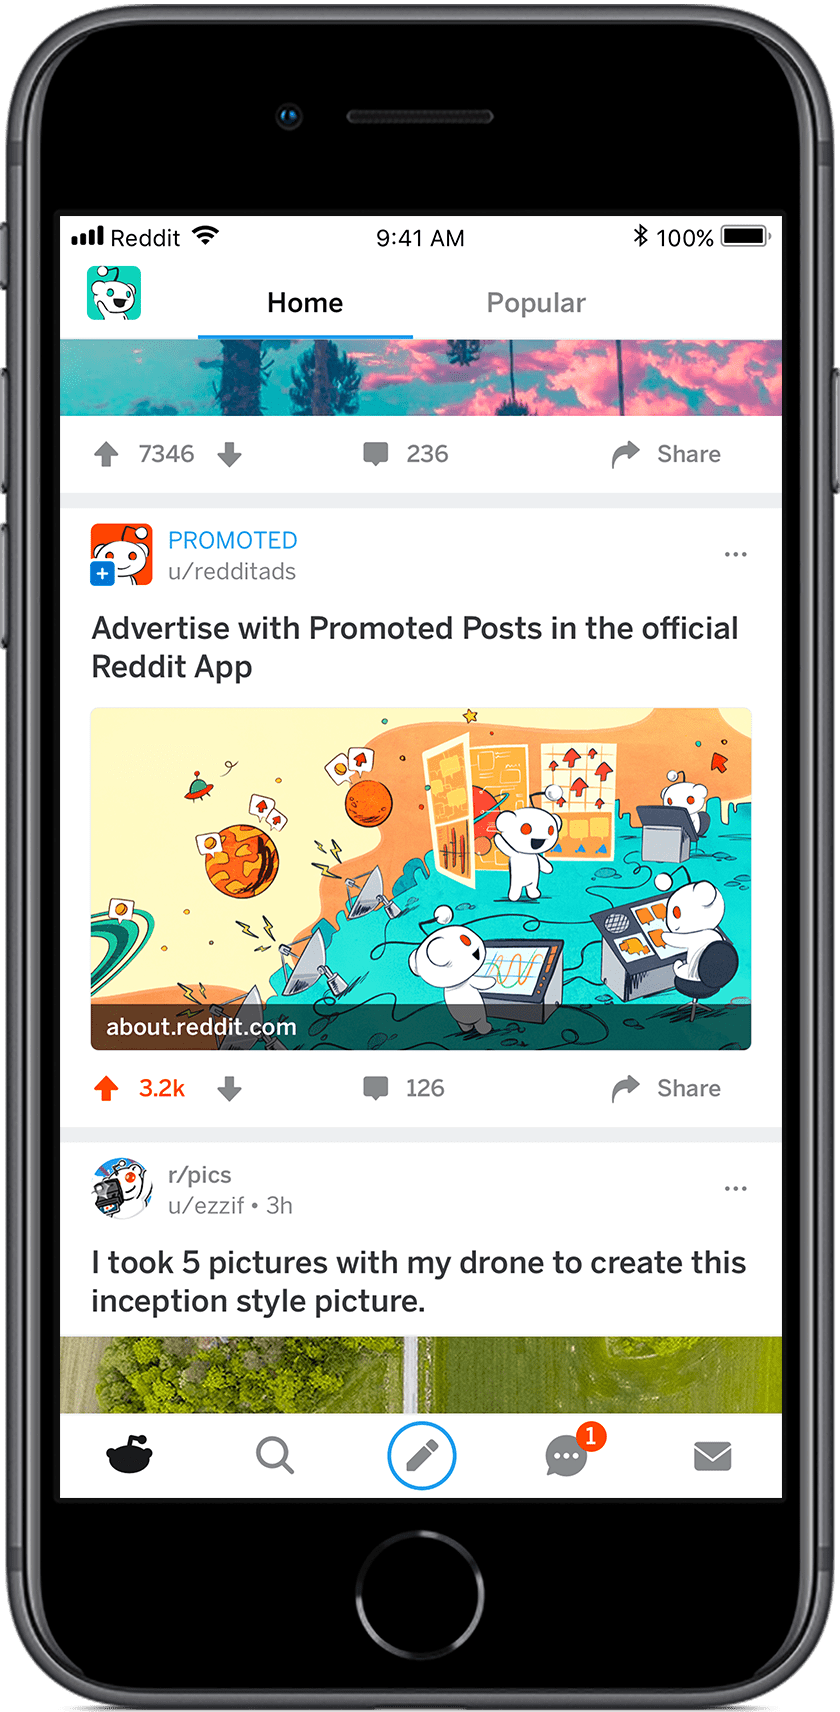 Reddit Launches New Promoted Posts for Mobile